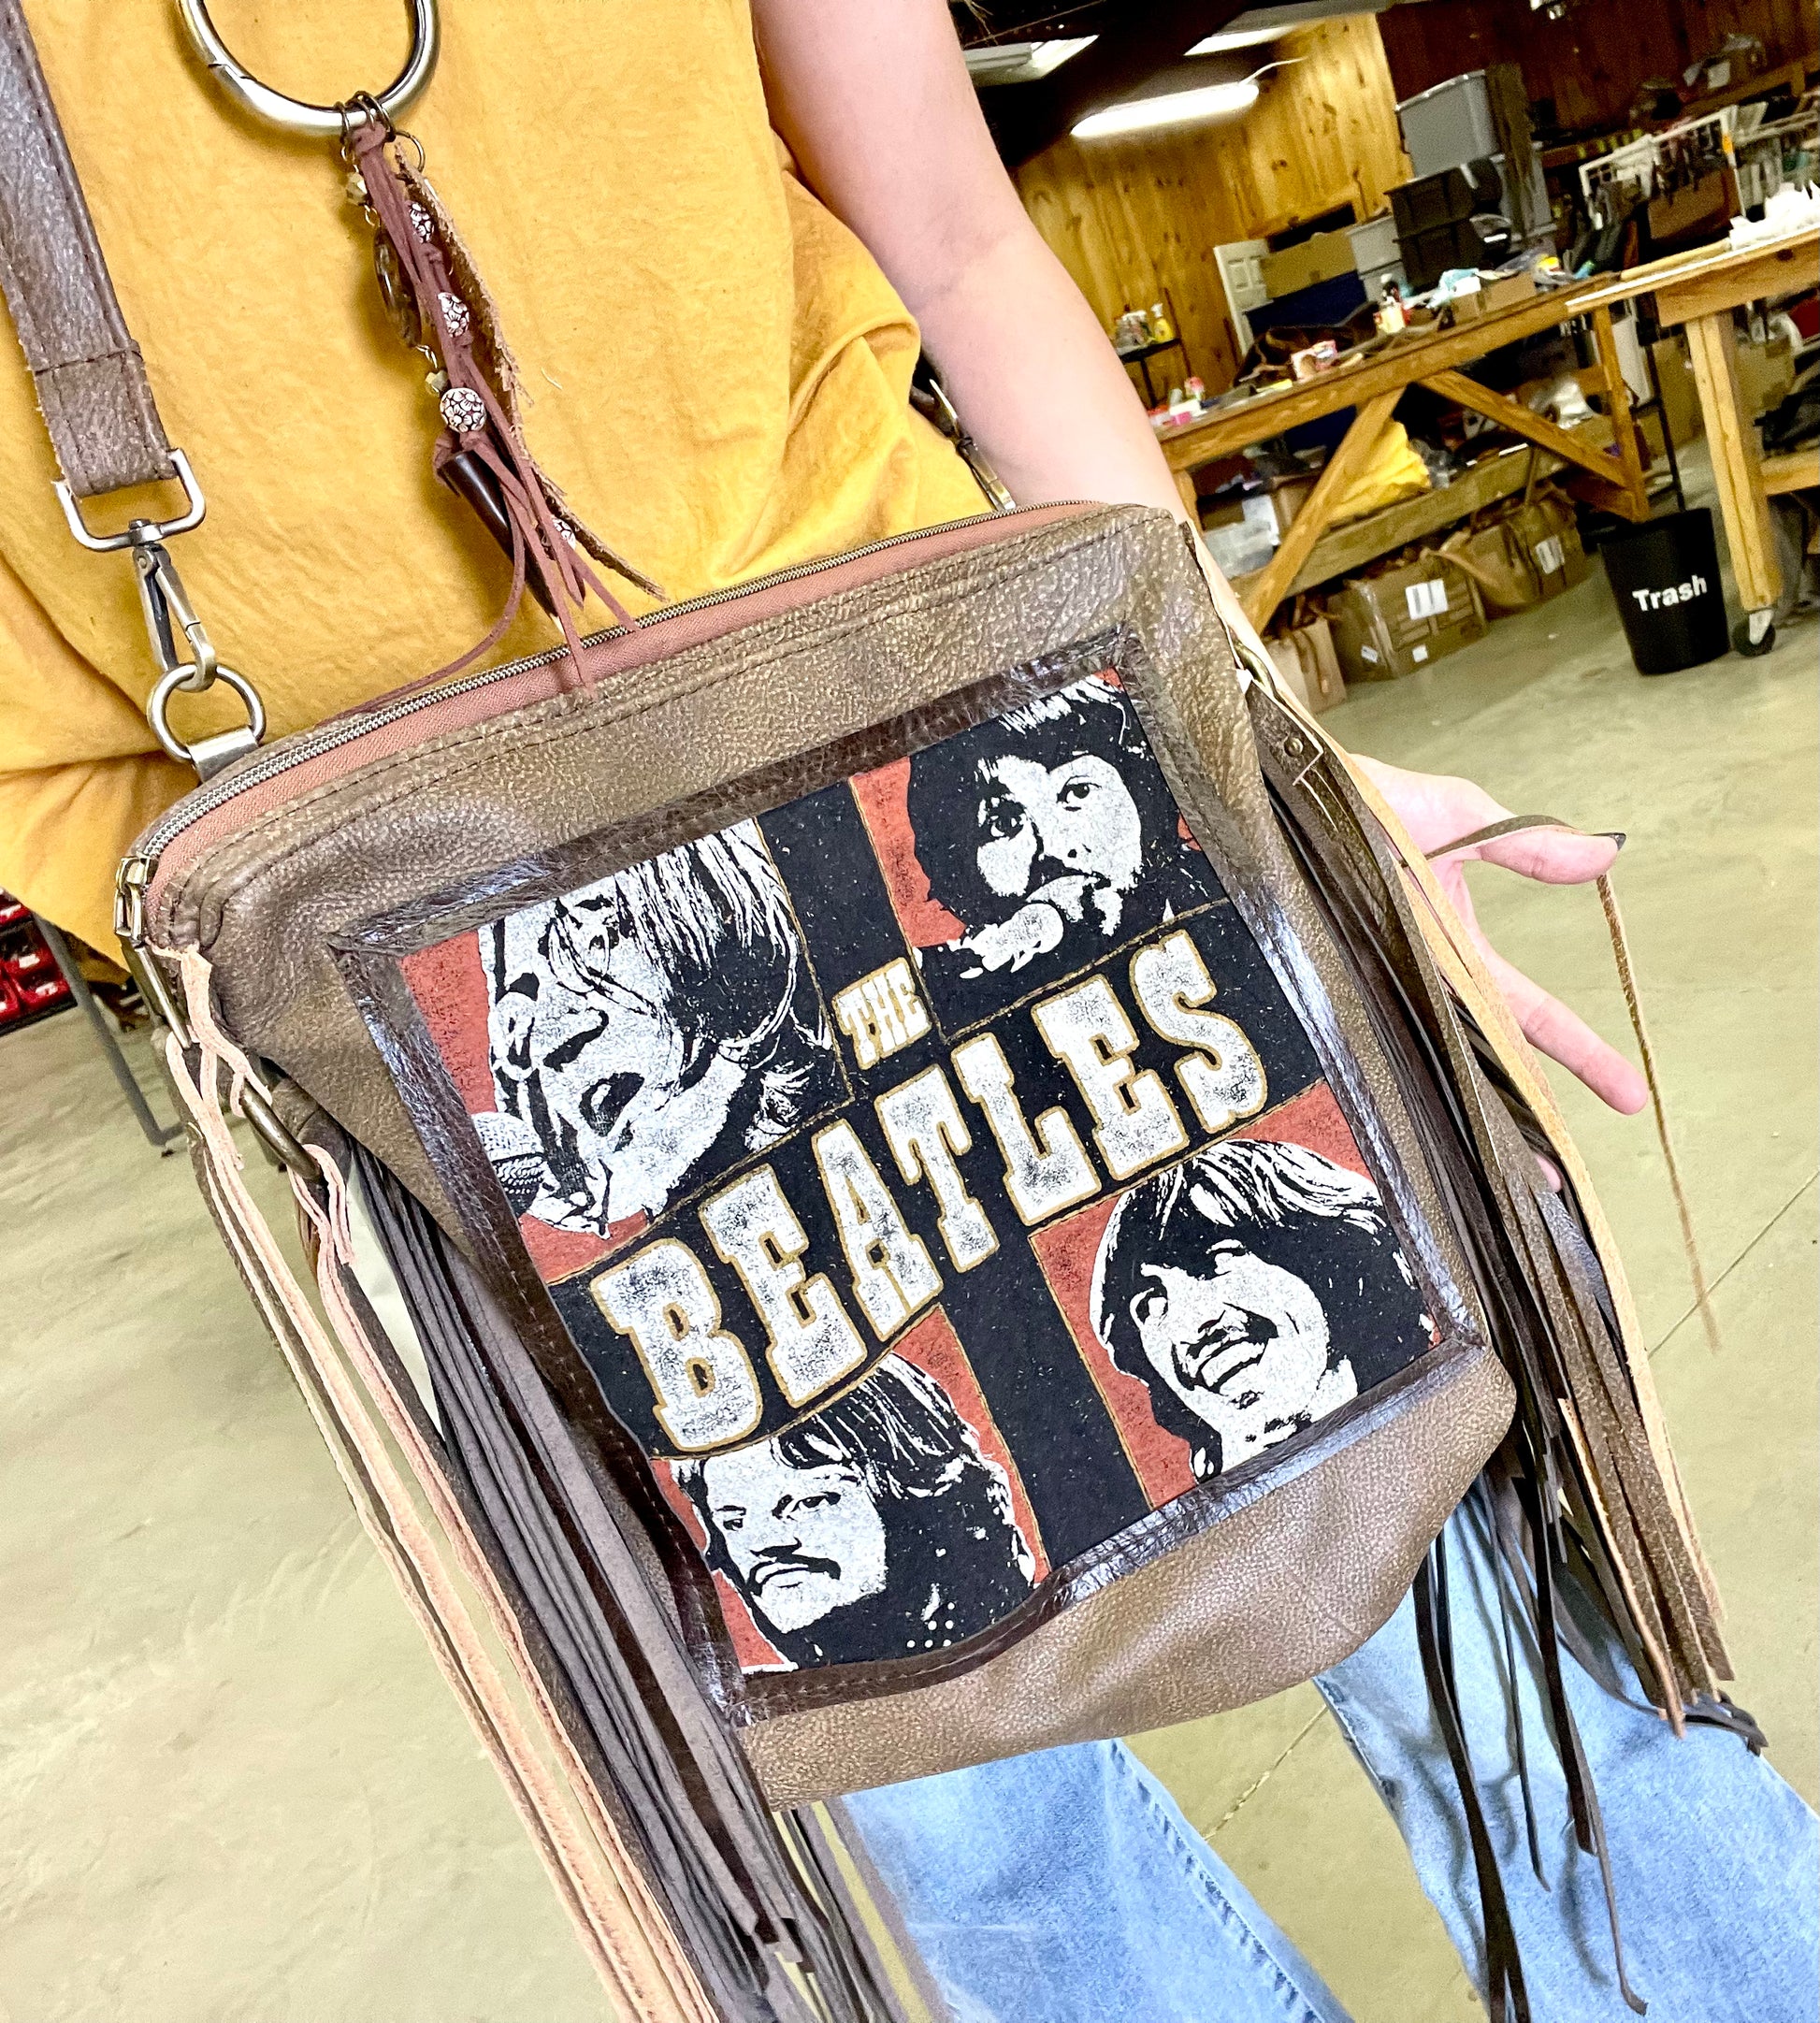 Vintage Concert T-shirt The Beatles Crossbody - Patches Of Upcycling